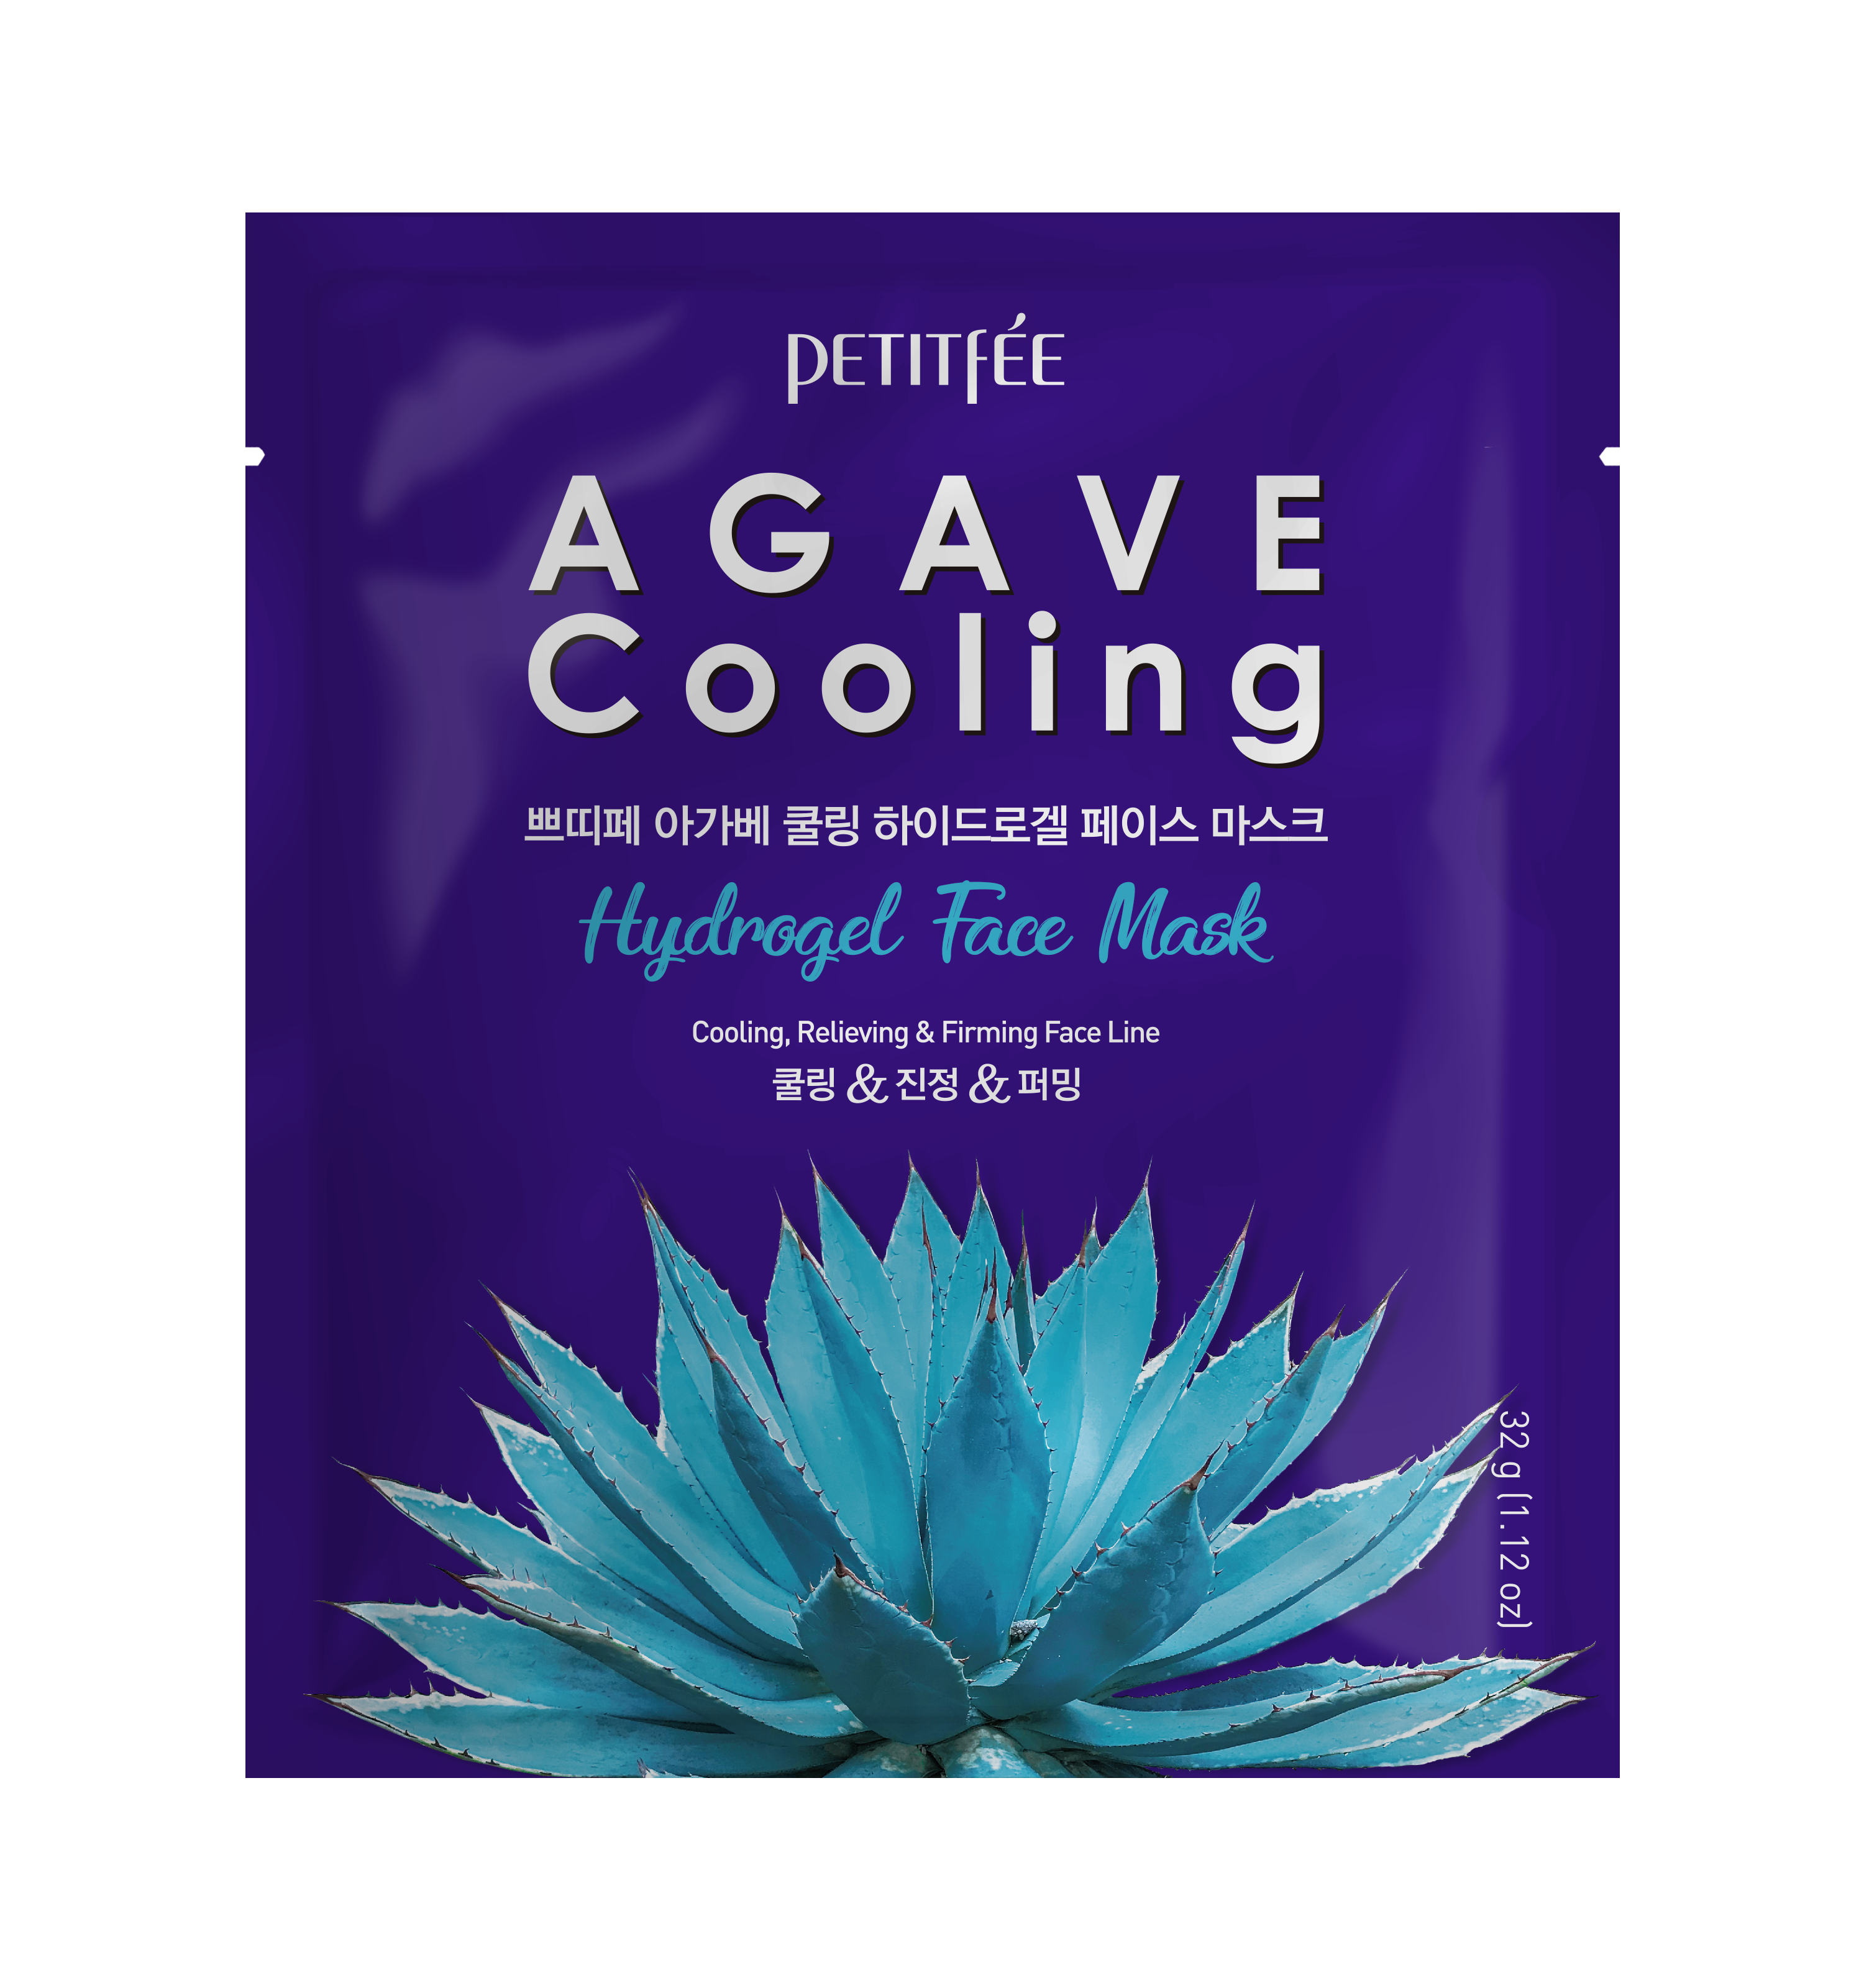 PETITFEE Agave Cooling хидрогелна маска за лице